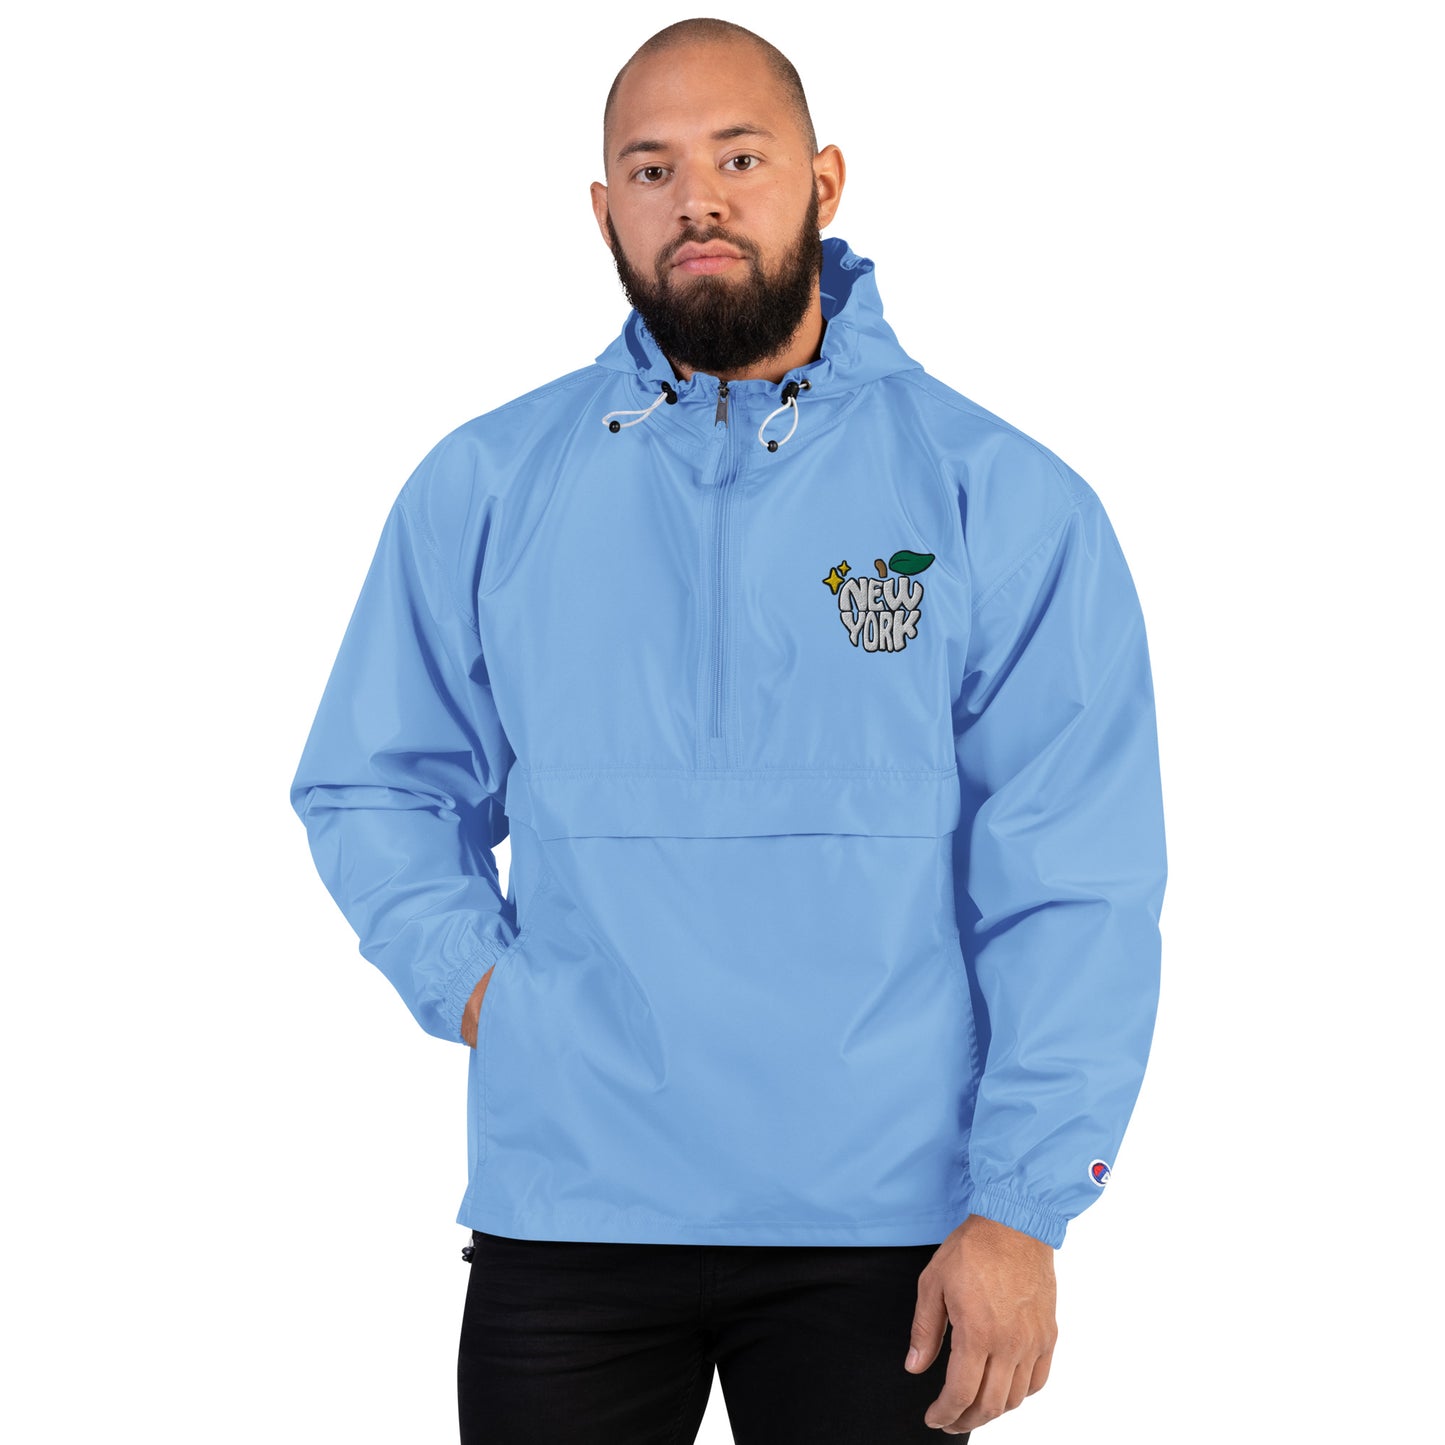 New York Apple Logo Embroidered Baby Blue Champion Packable Windbreaker Jacket Scattered Streetwear